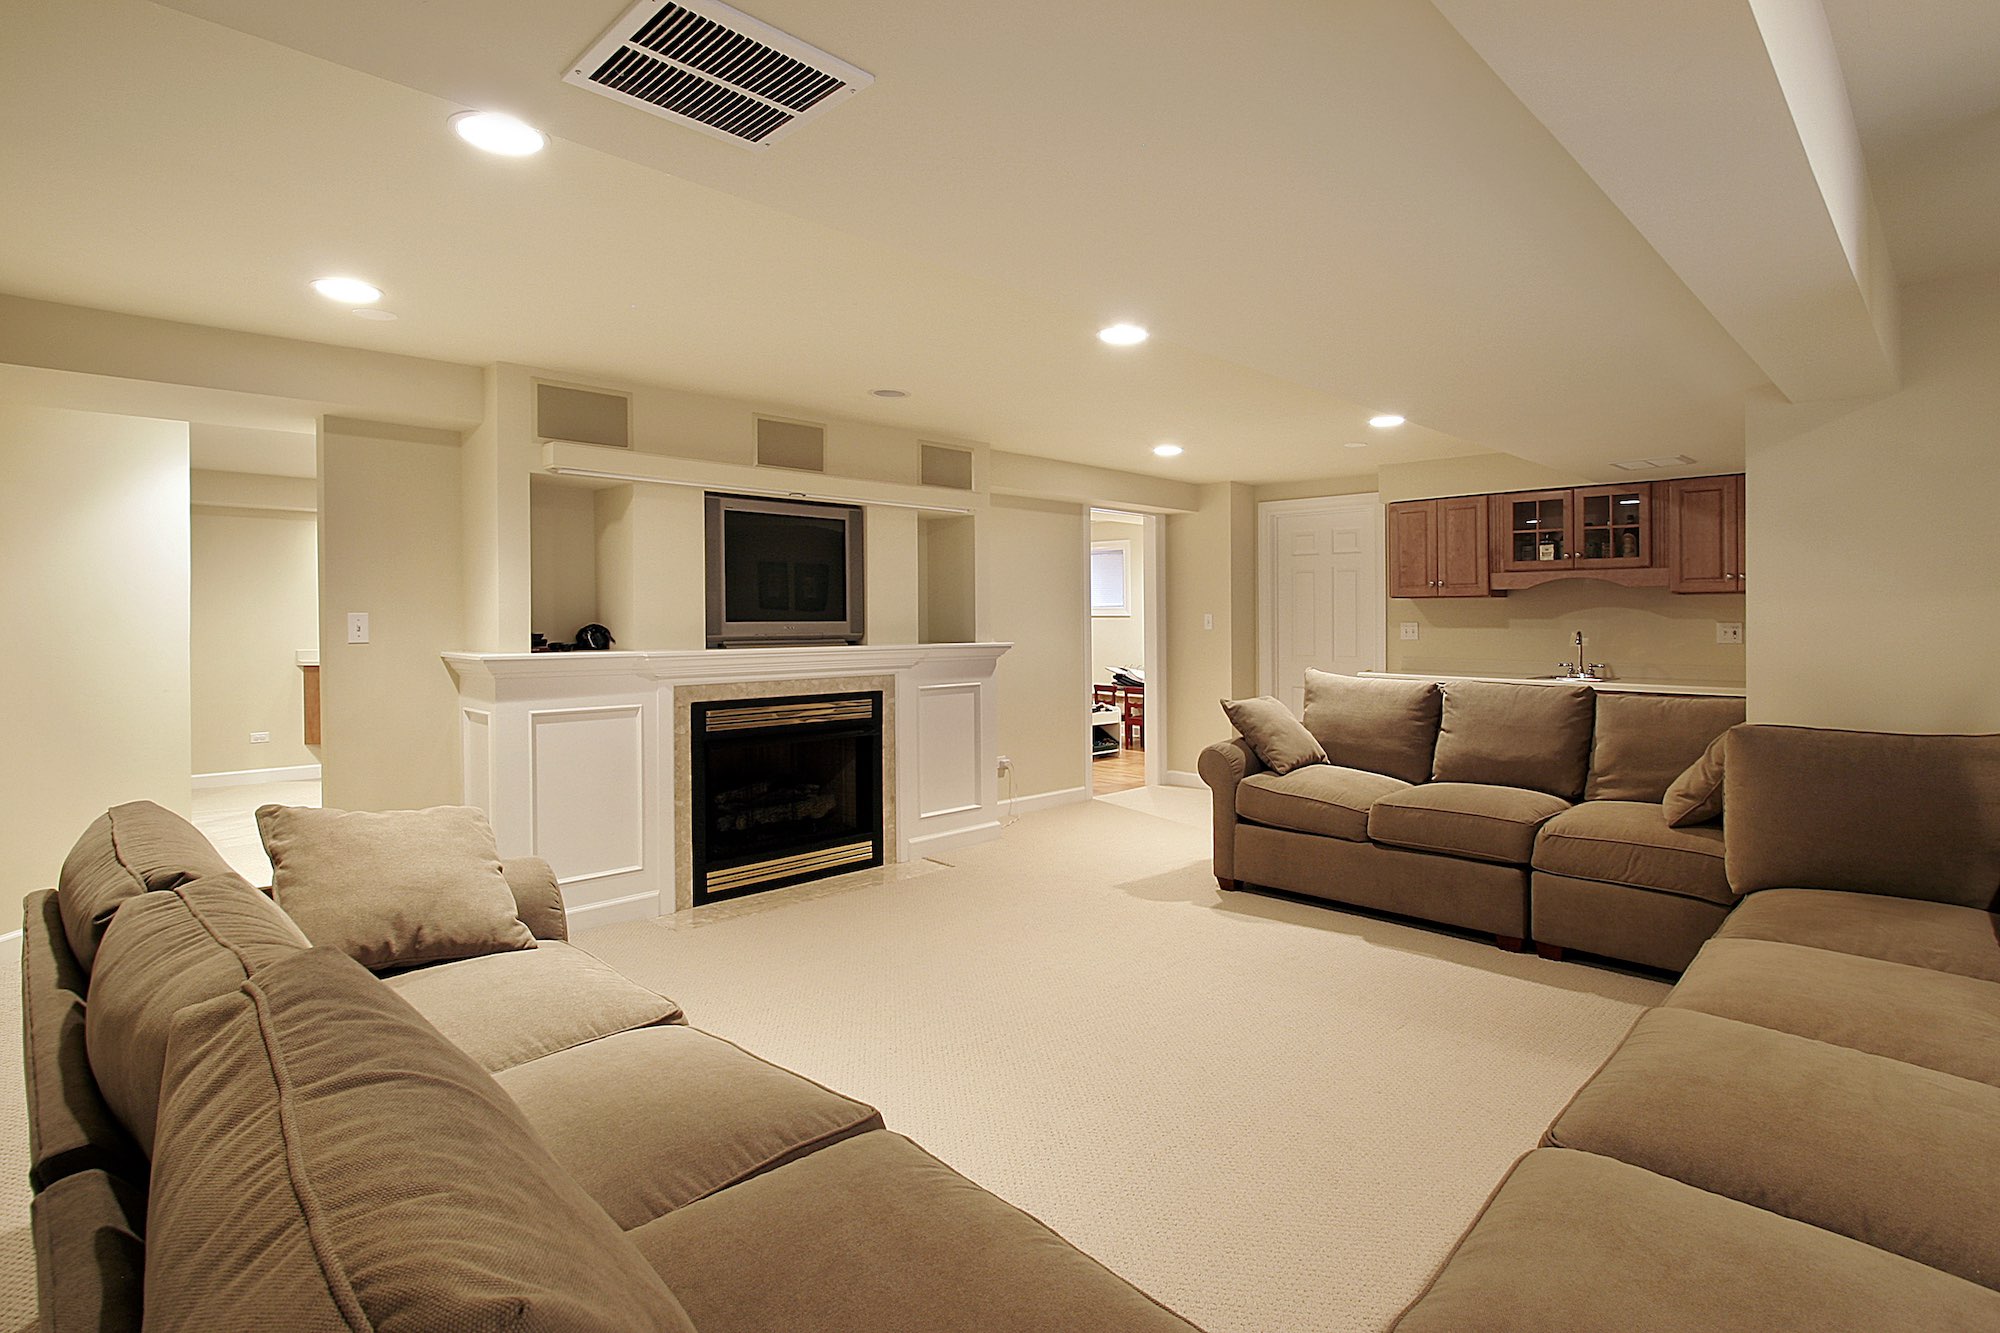 Basement in luxury home with white fireplace